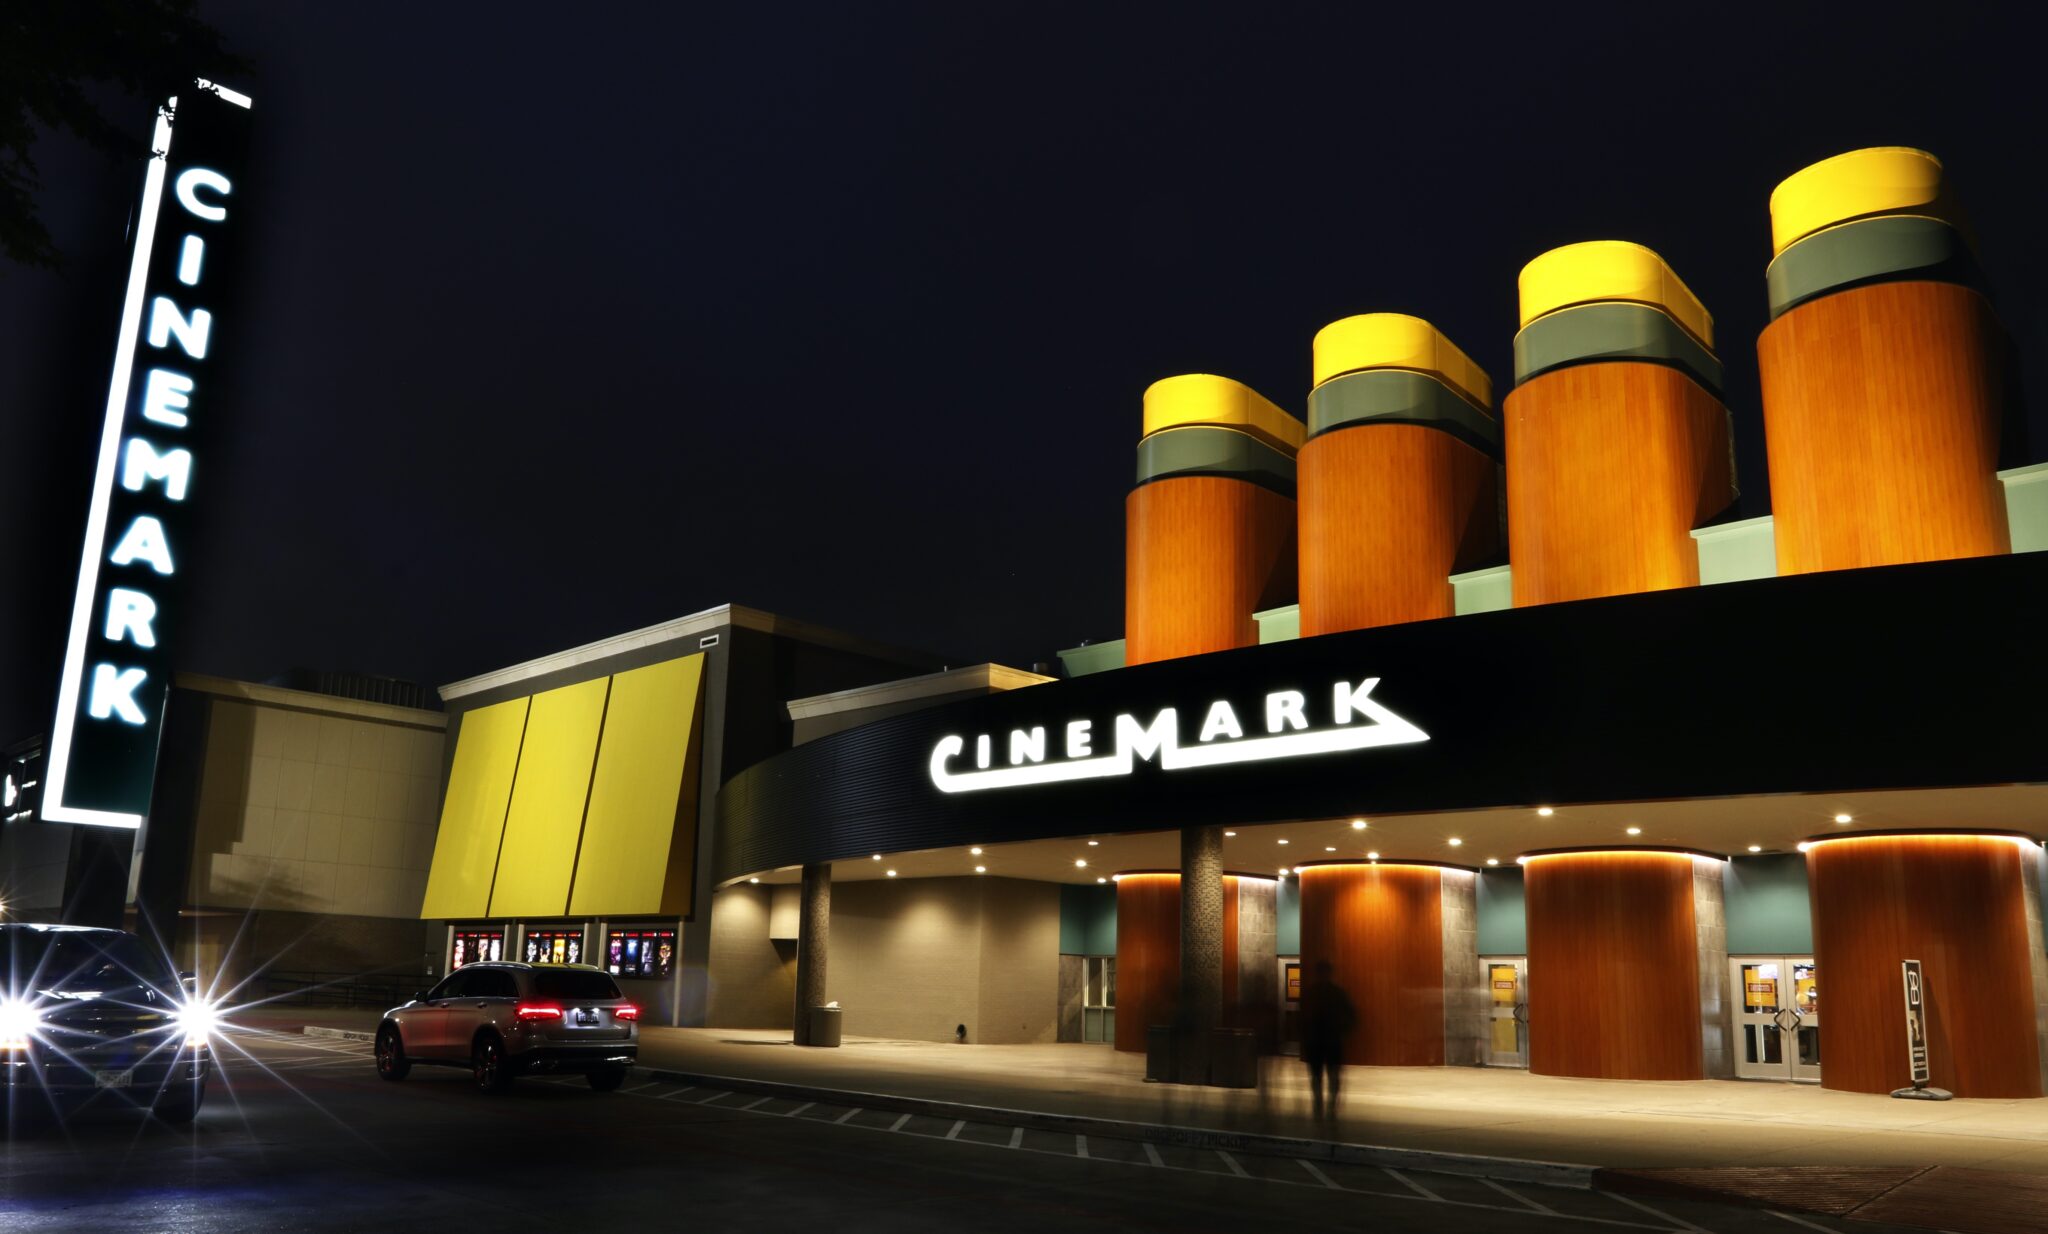 Cinemark,  Halloween Private Watch Party giveaway
